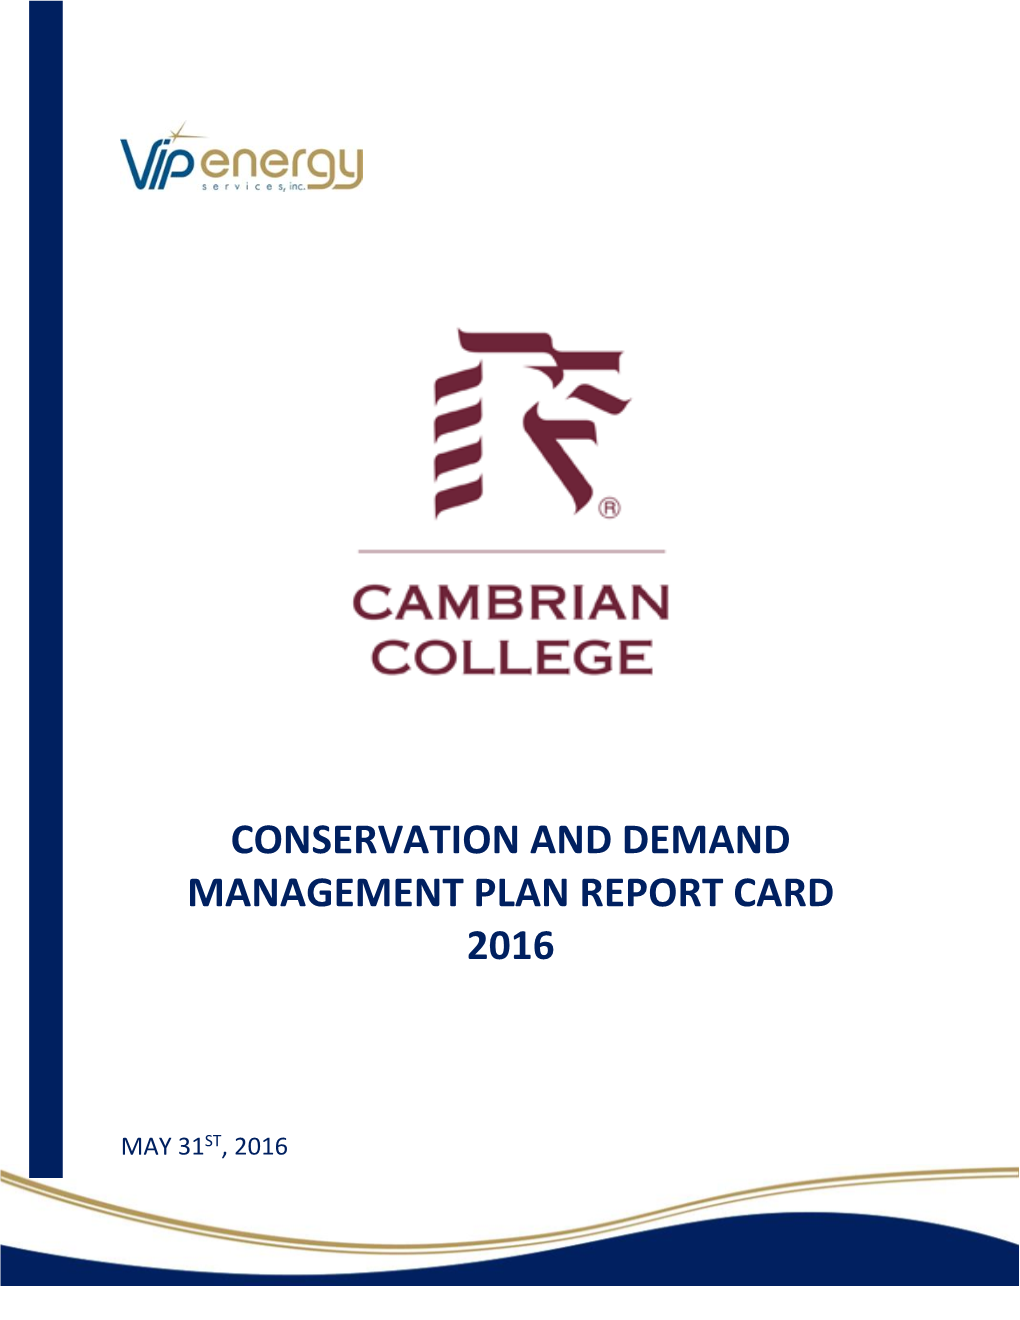 Conservation and Demand Management Plan Report Card 2016